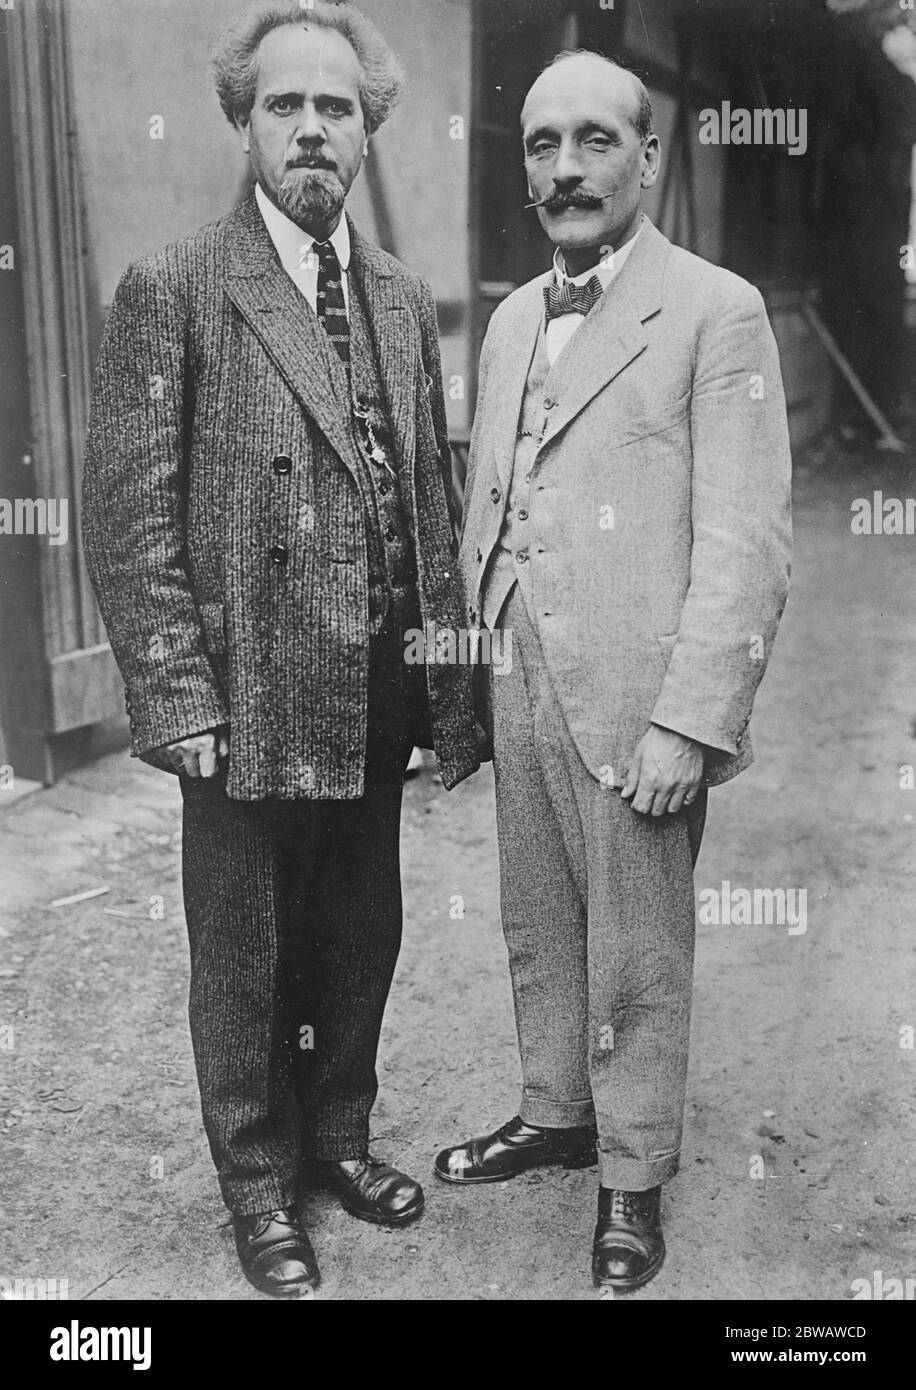 British Labour MP in Germany . An important political event took place in Germany with the amalgamation of the Independent Socialists and the Majority Socialists at Nurnberg . Charles George Ammon, 1st Baron Ammon , MP ( right ) with the German Independent Socialist , Grispien . 27 September 1922 Stock Photo